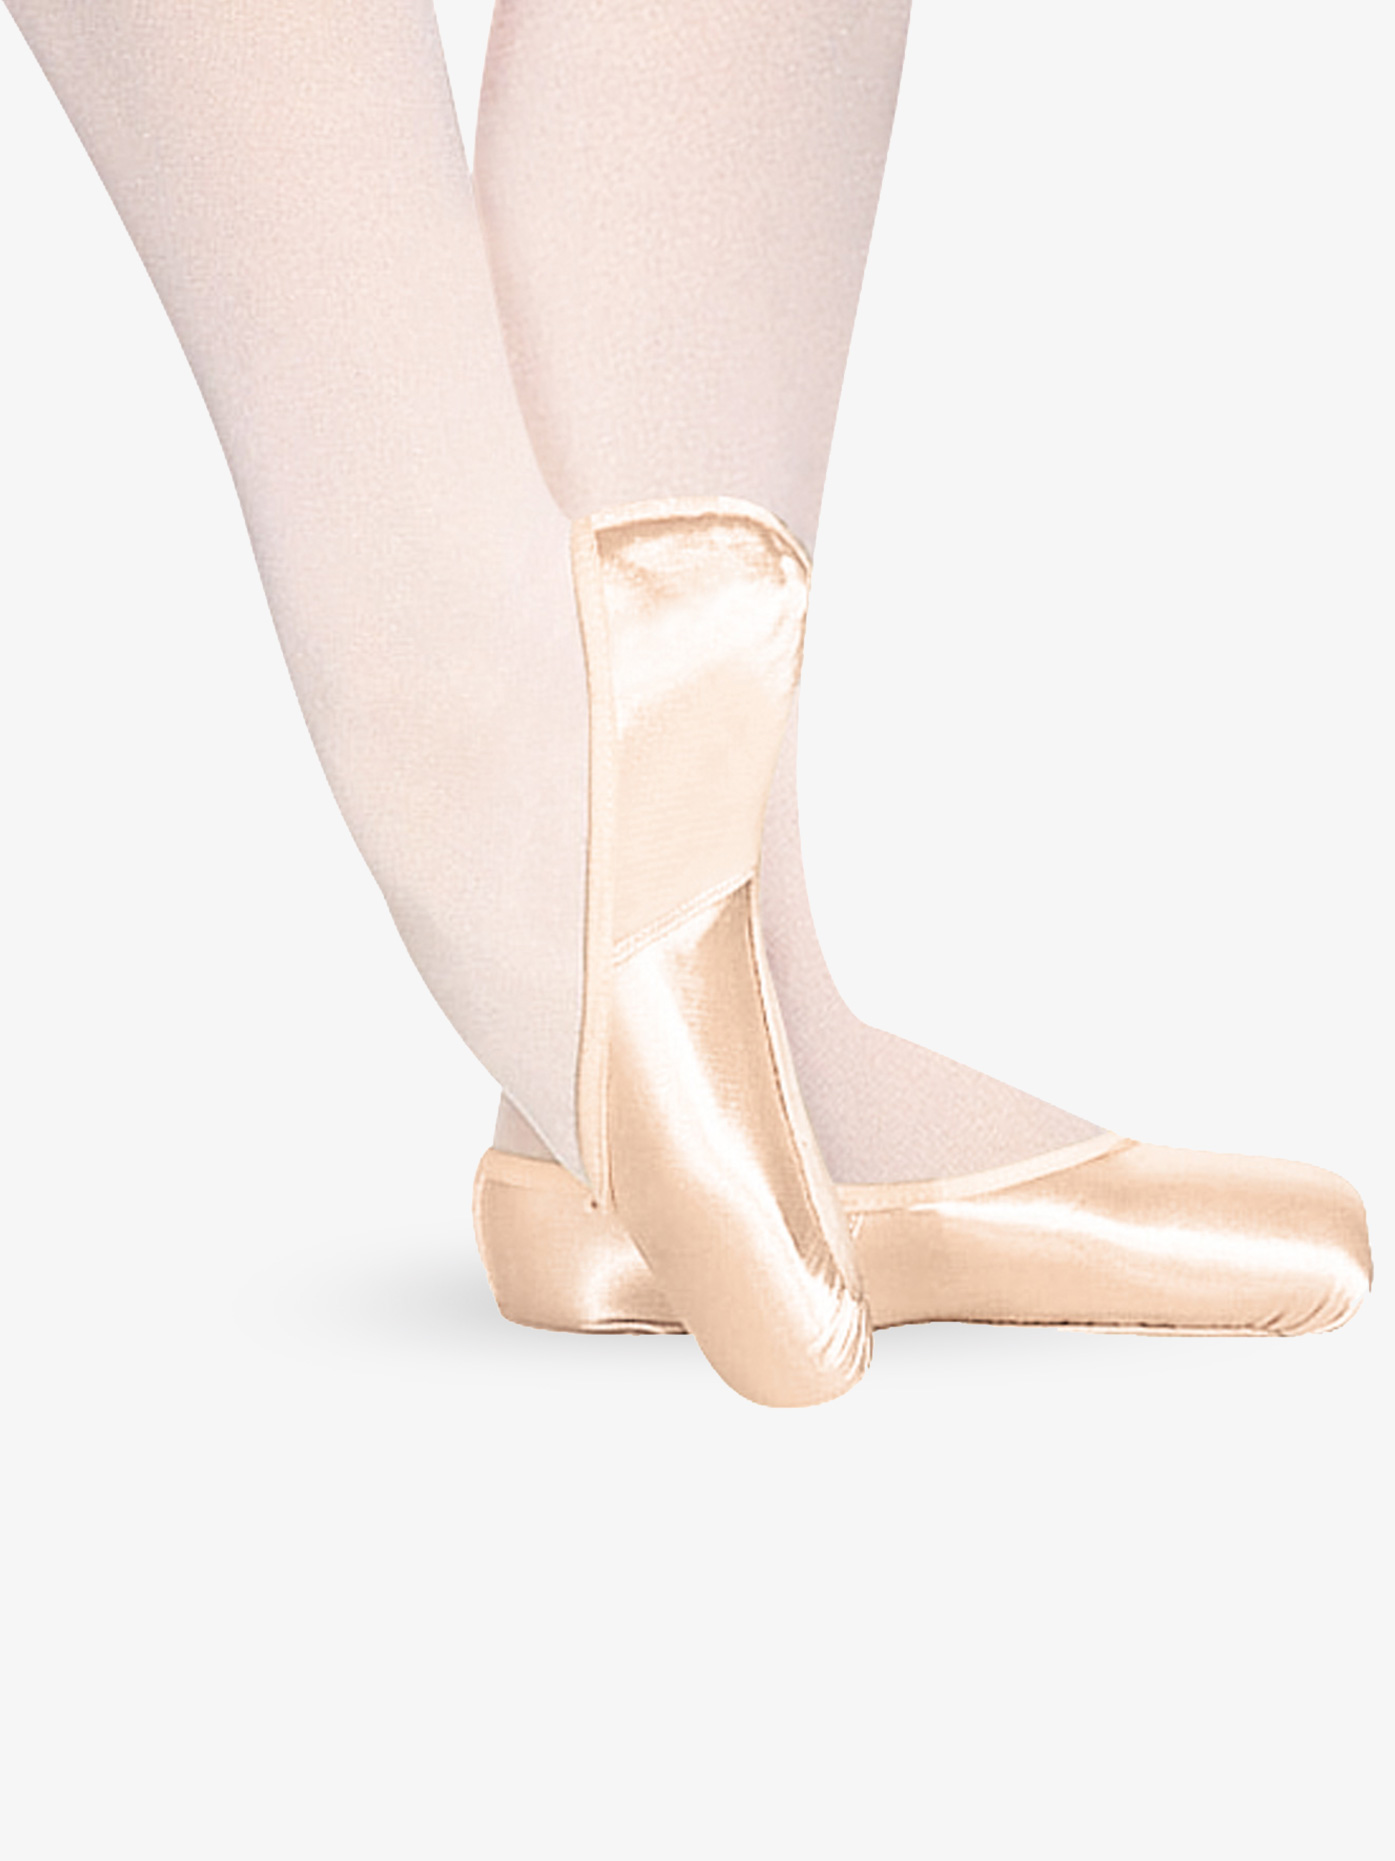 Freed Pointe Shoes Size Chart